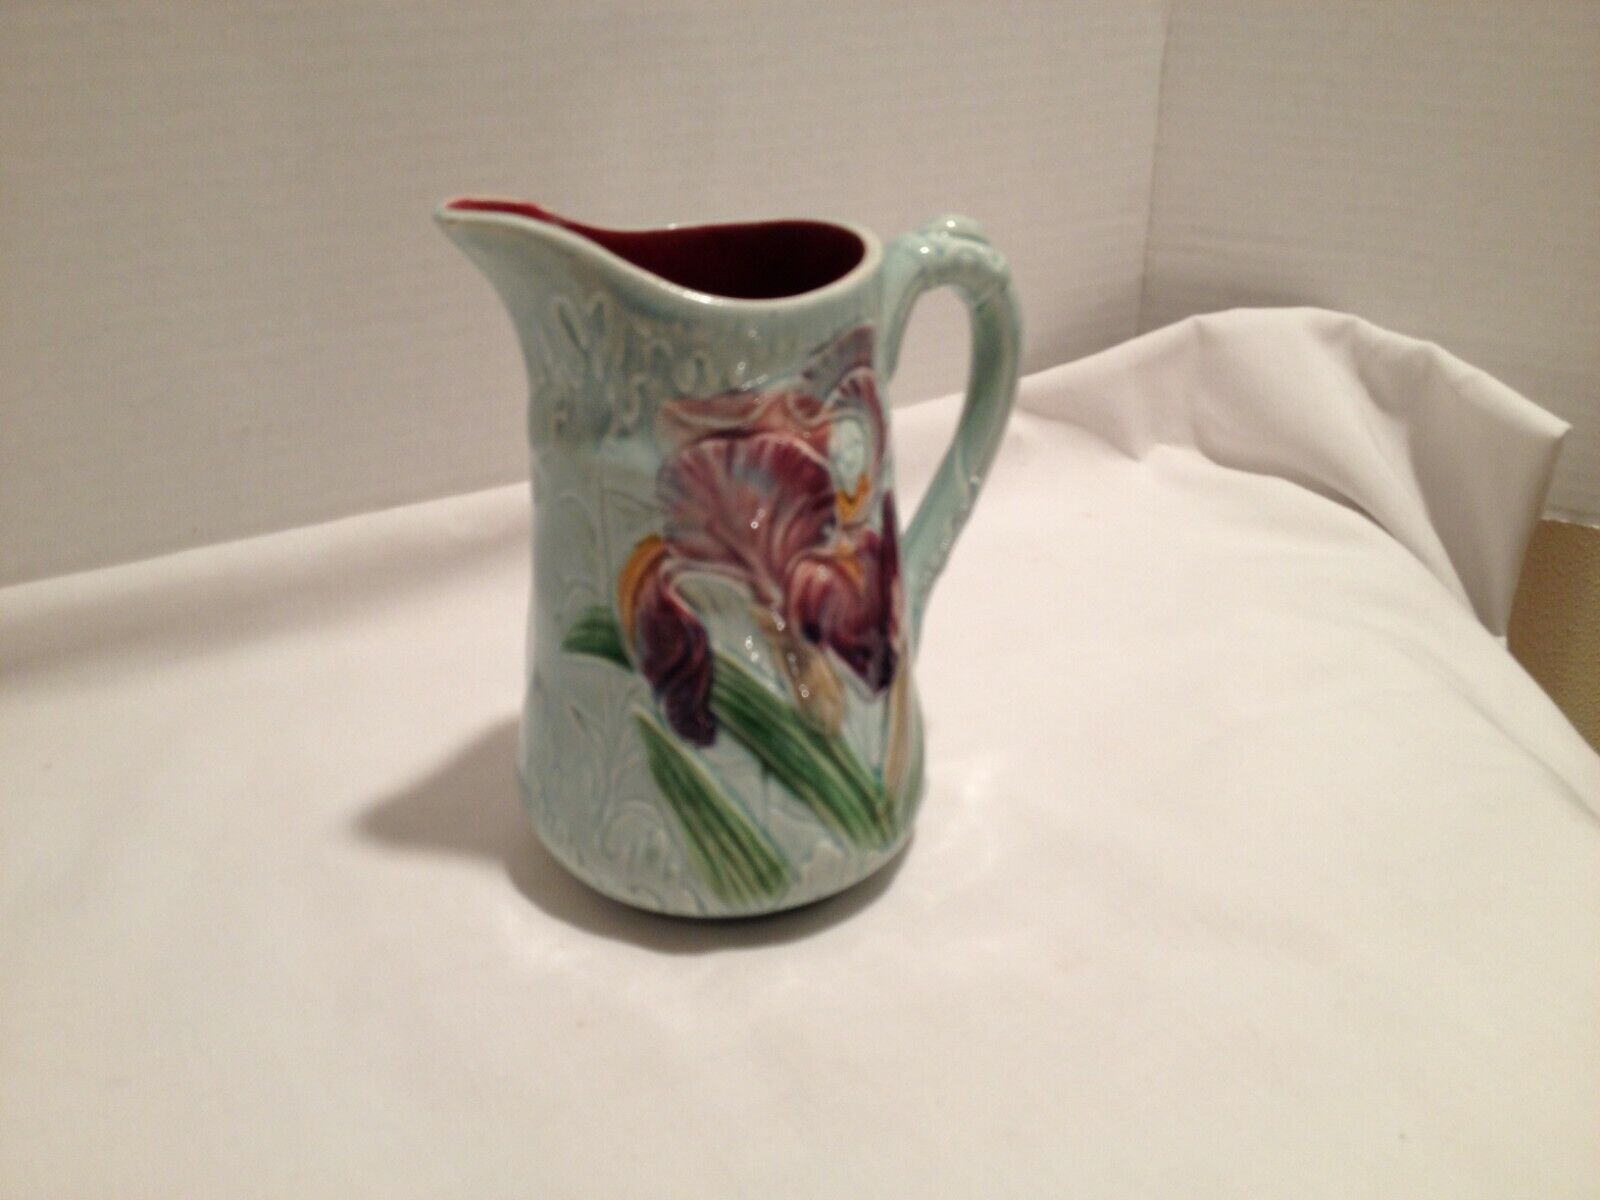 Vintage French Majolica Iris Purple Flower Pitcher by Choisy -Le-Roi